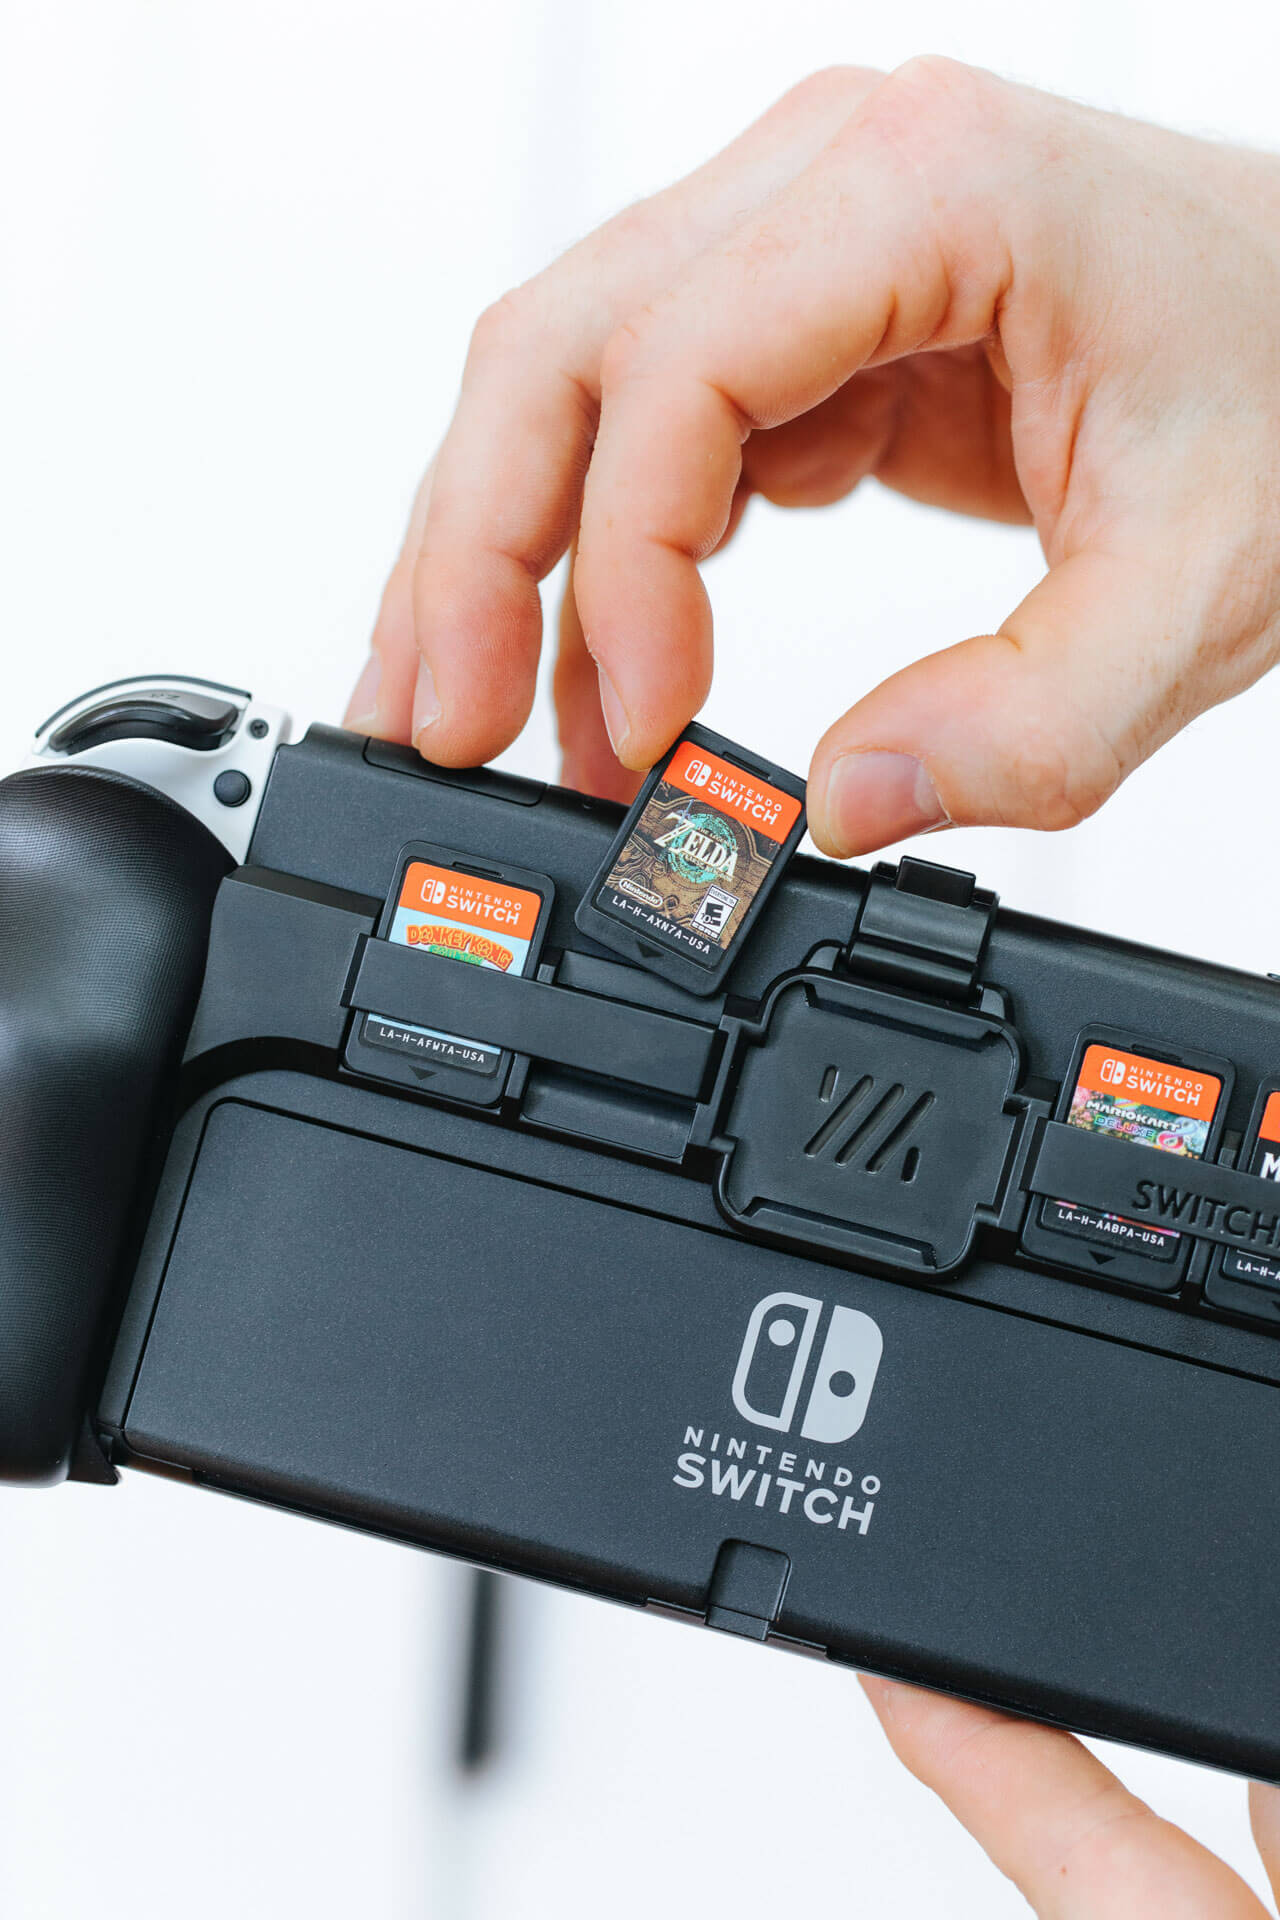 Switchmate Grip